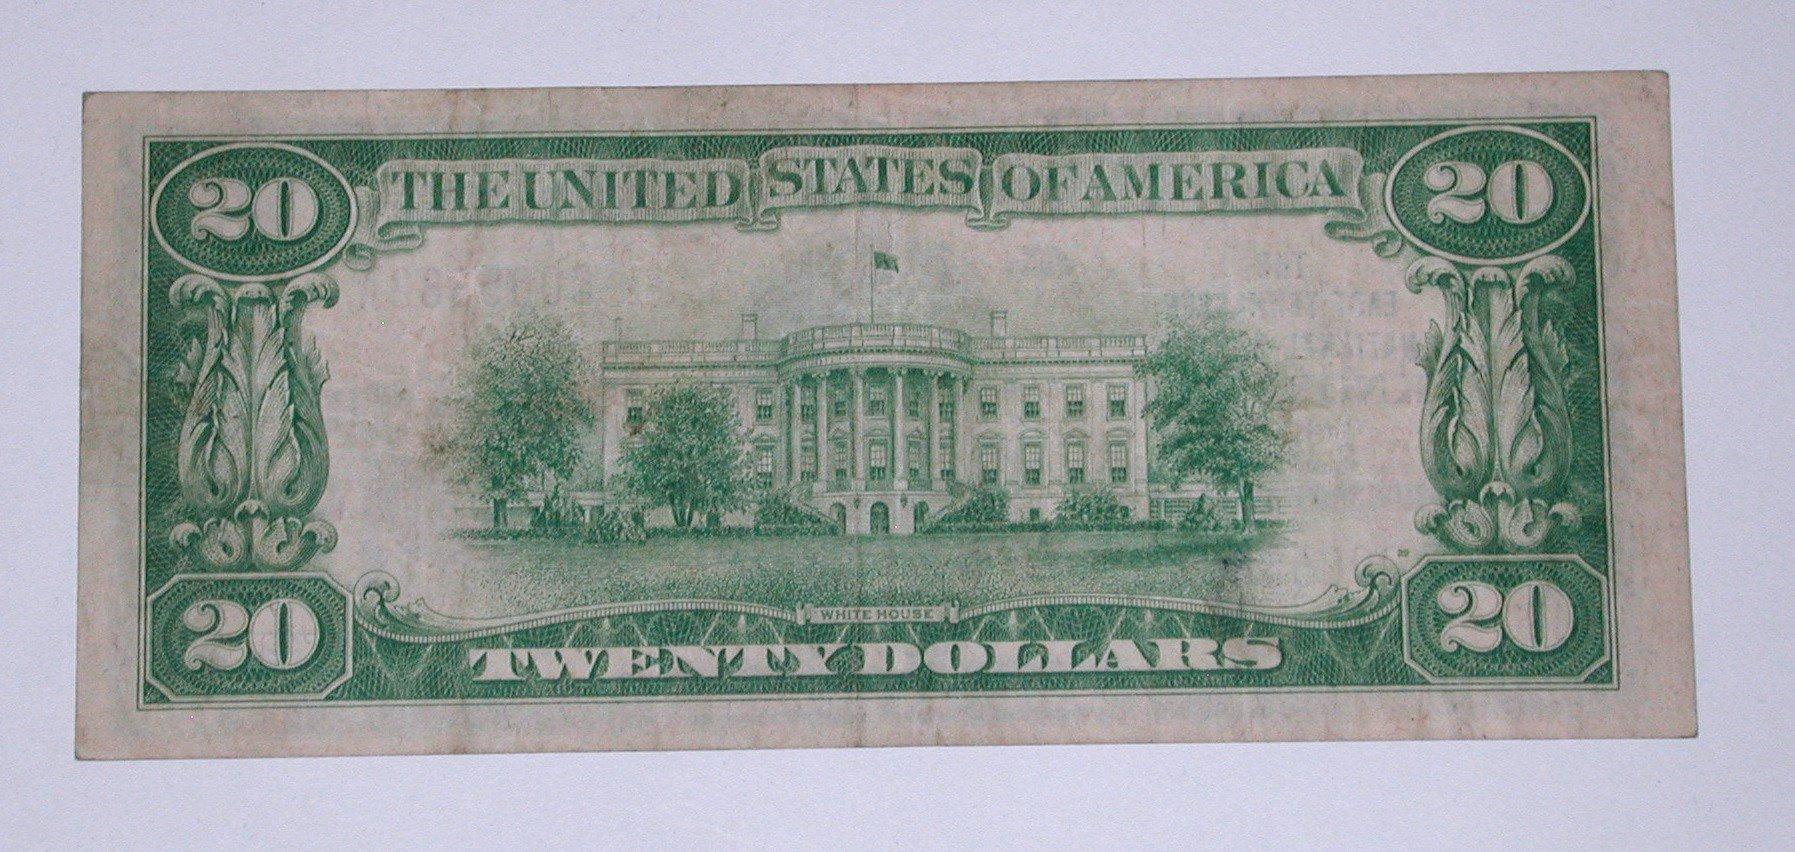 SERIES 1929 $20 NATIONAL CURRENCY - KNOXVILLE, TN